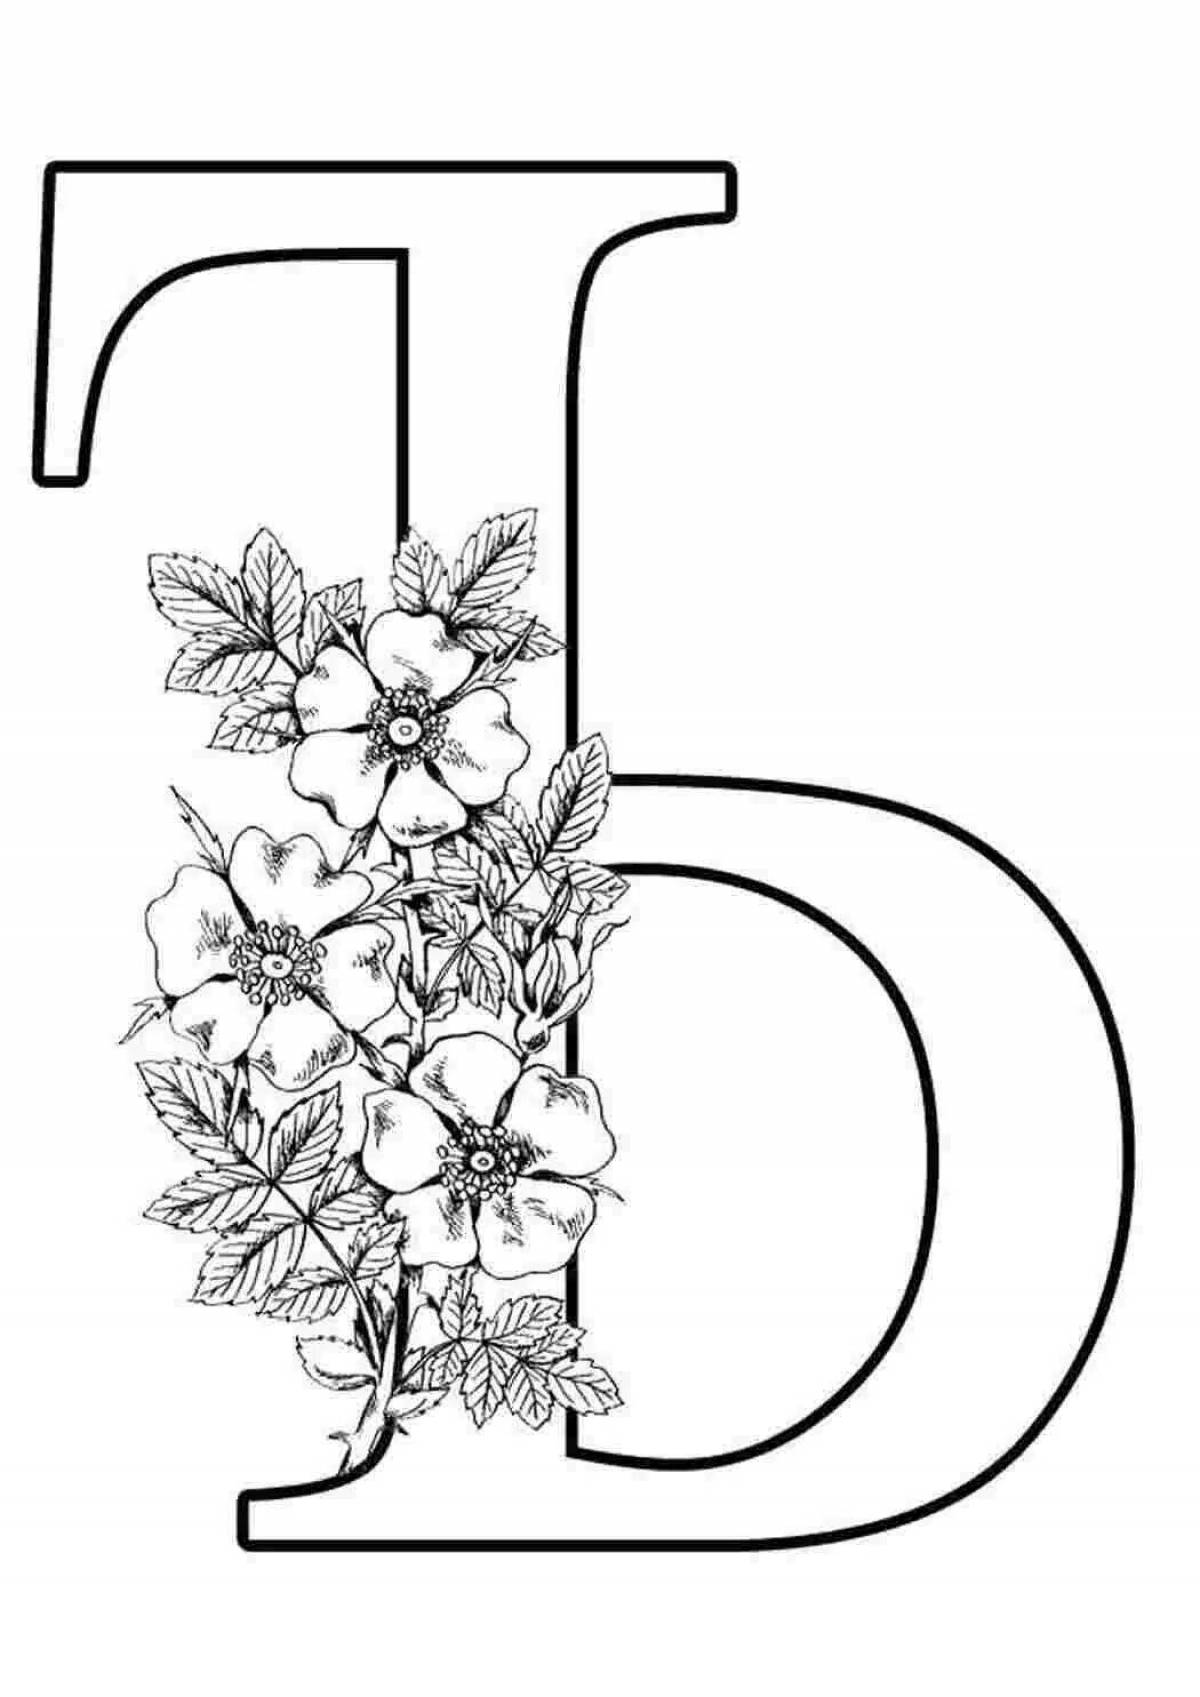 Happy letter c with flowers